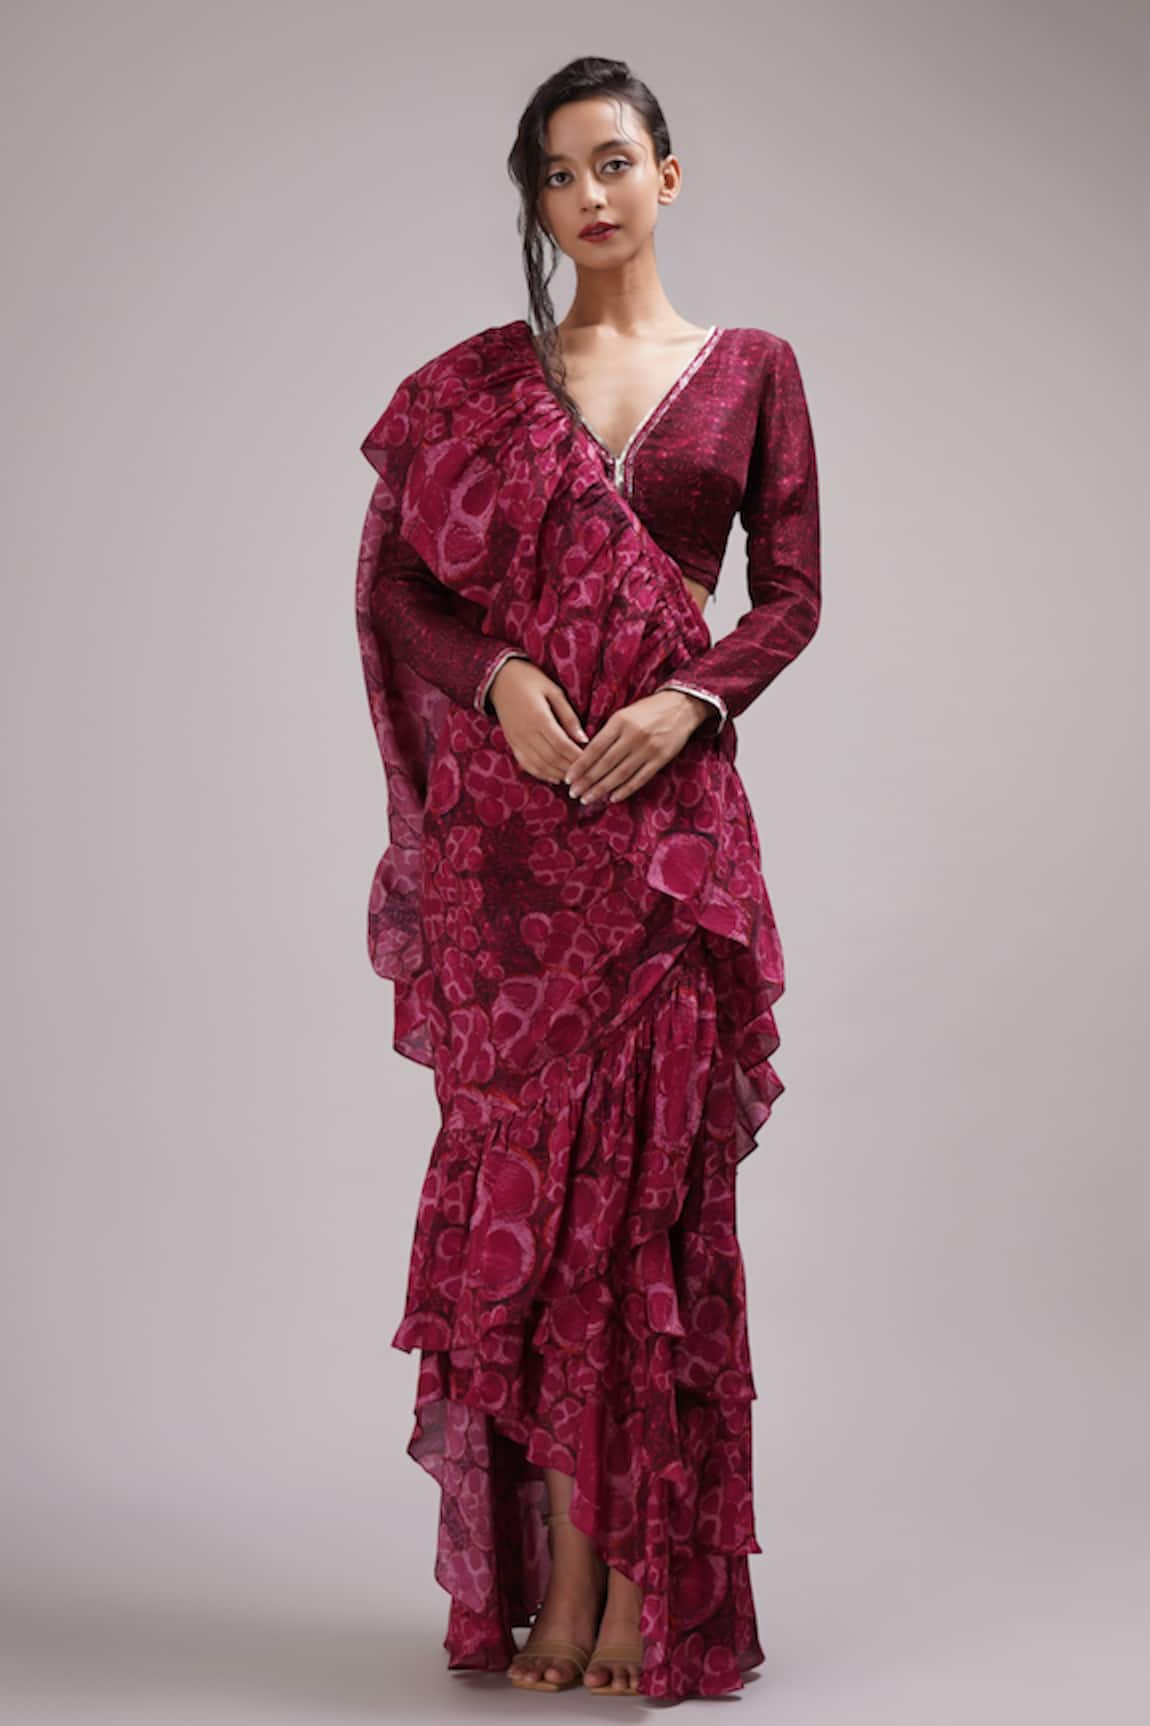 Breathe by Aakanksha Singh Winkle Printed Pre-Draped Ruffle Saree With Blouse